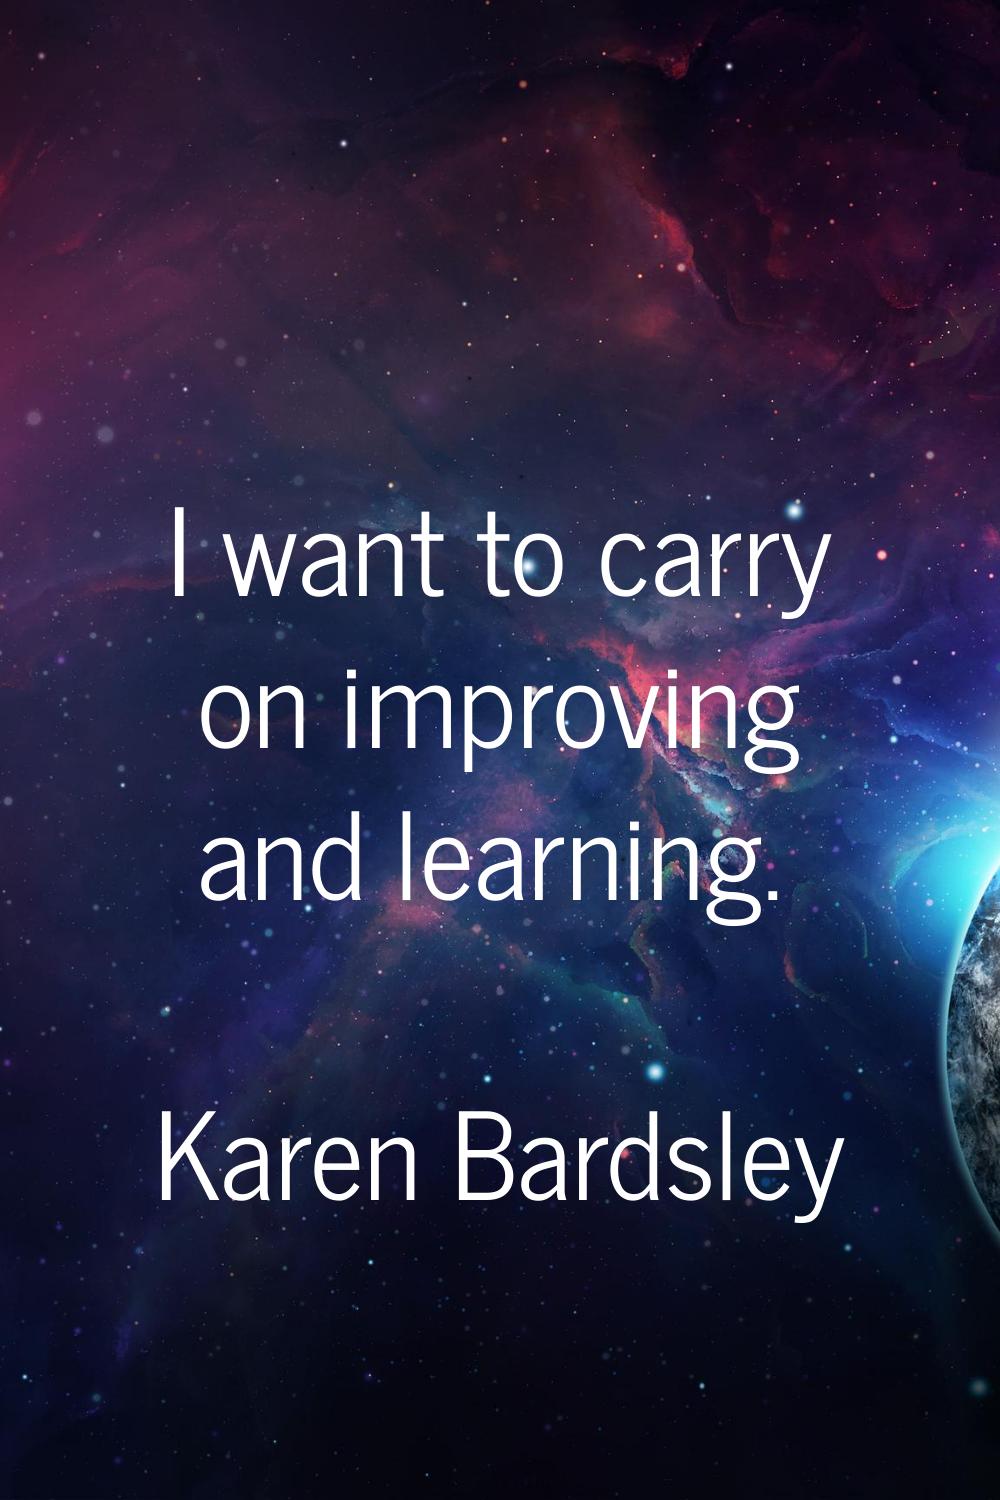 I want to carry on improving and learning.